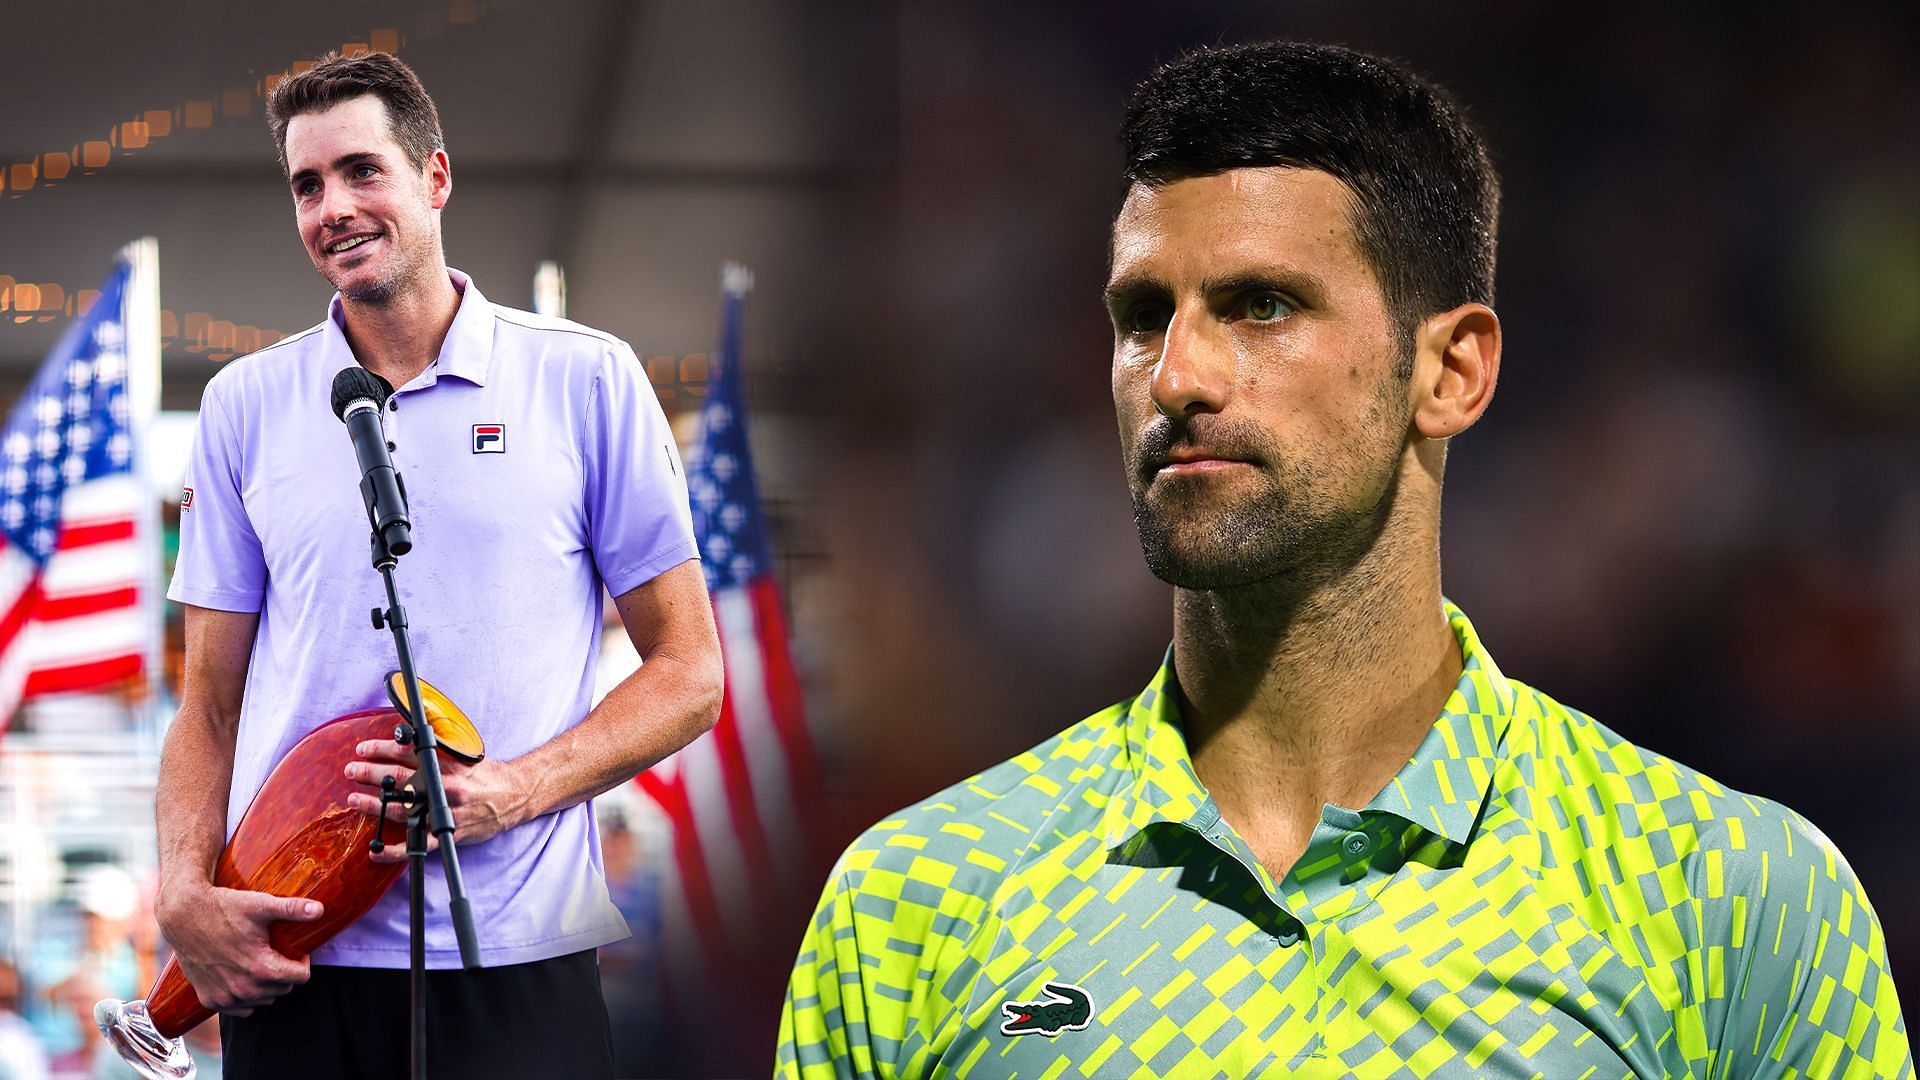 Novak Djokovic requested for special permission to enter the US